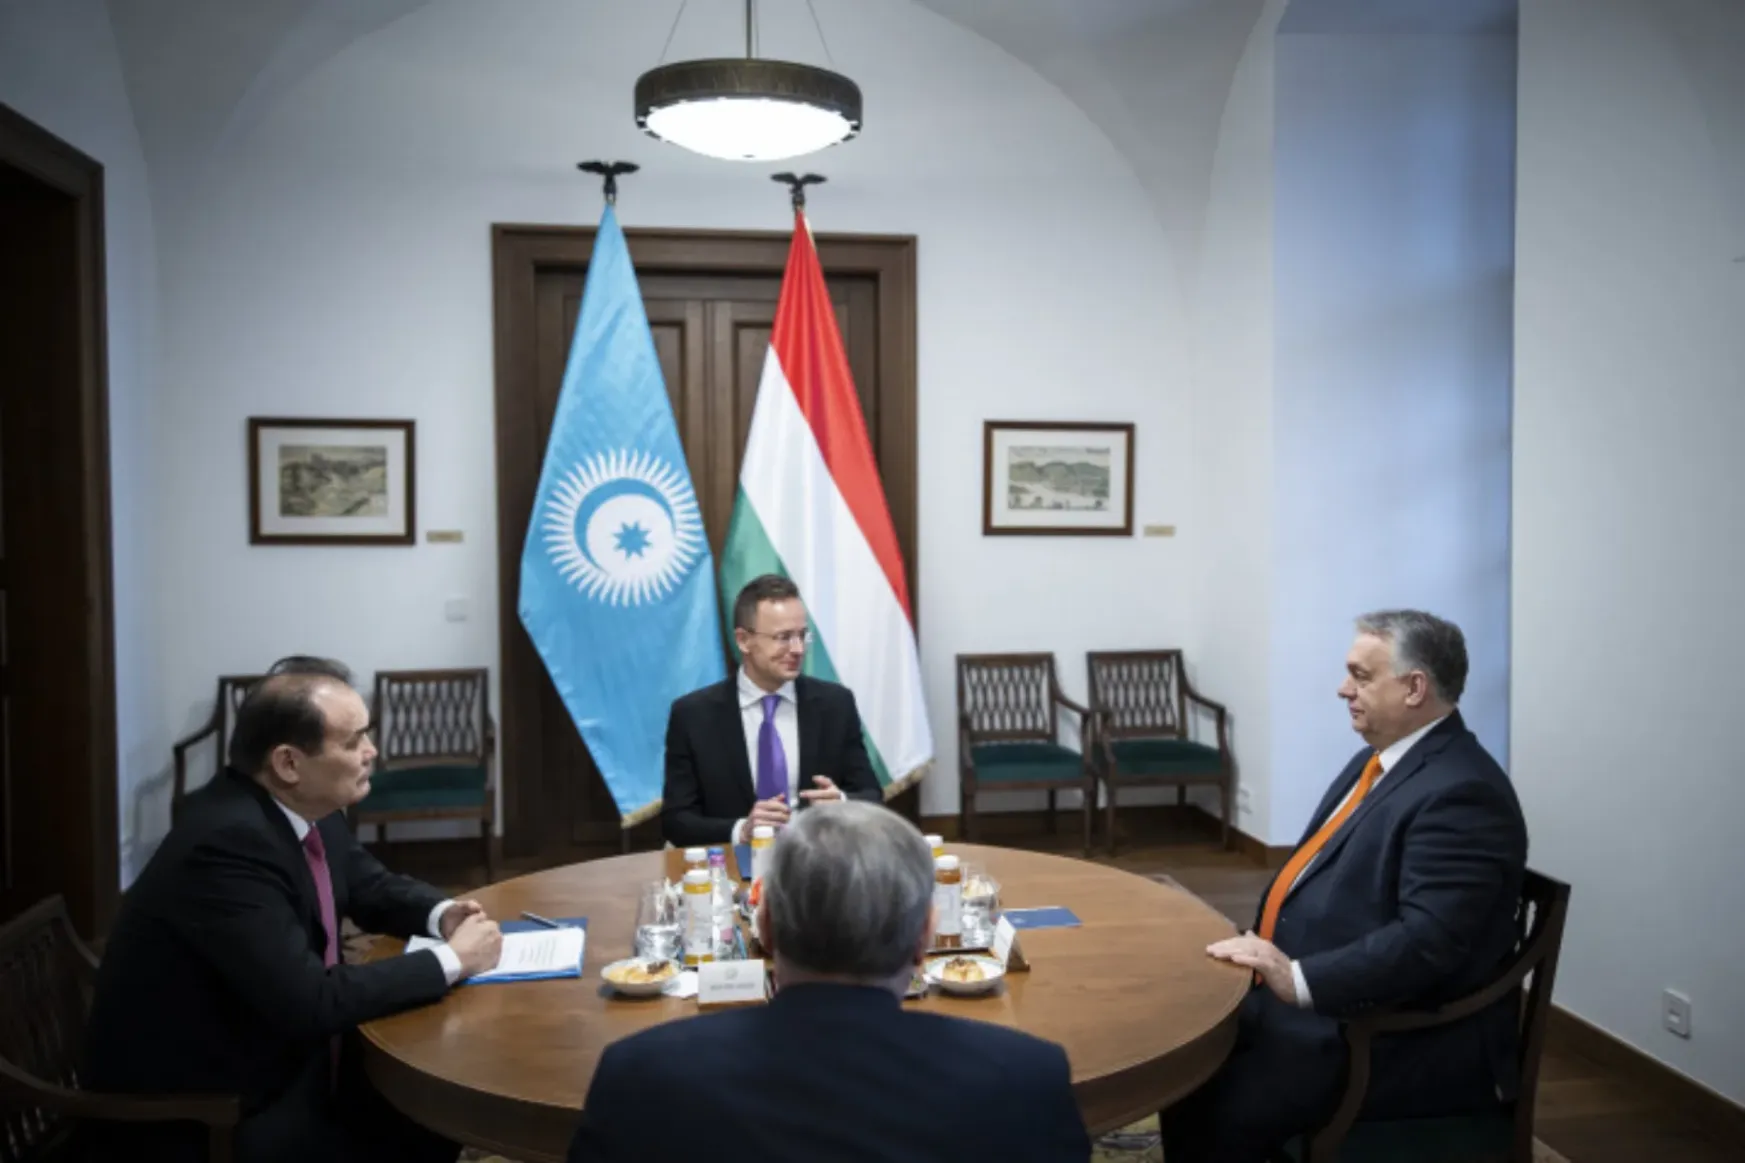 Uzbekistan to open embassy in Budapest, Orbán receives president of Turkic Investment Fund